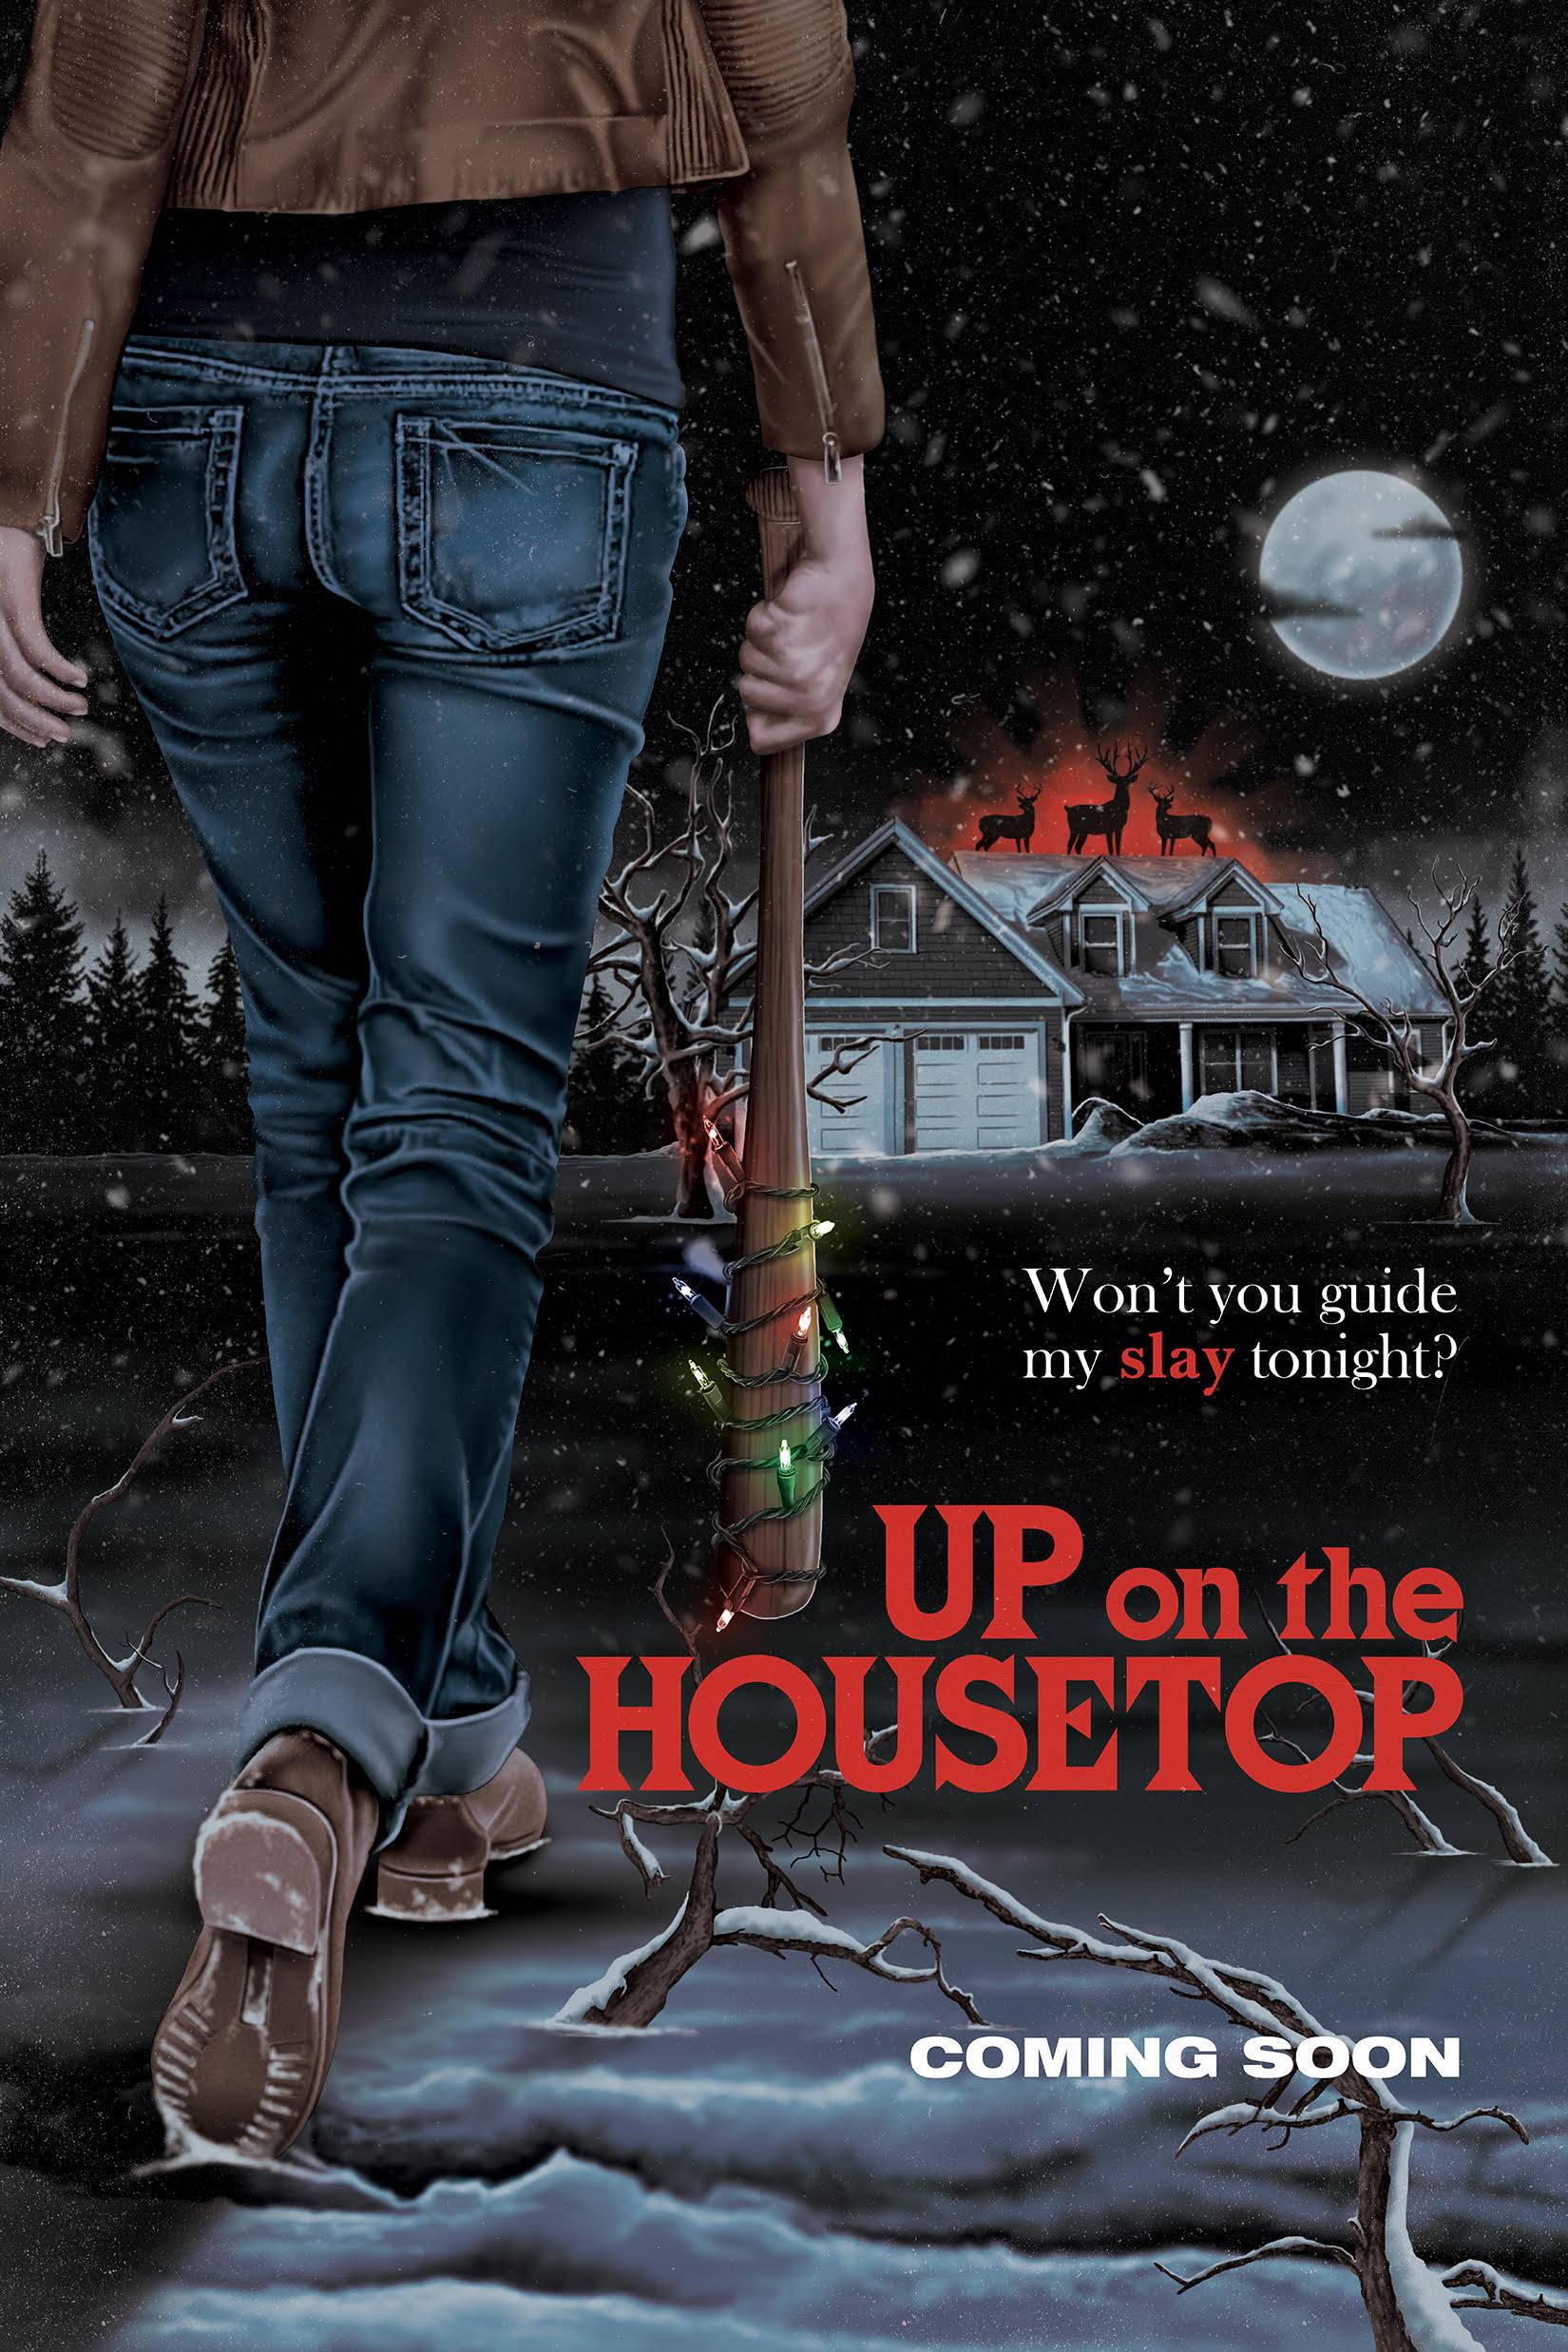 Up on the house top poster